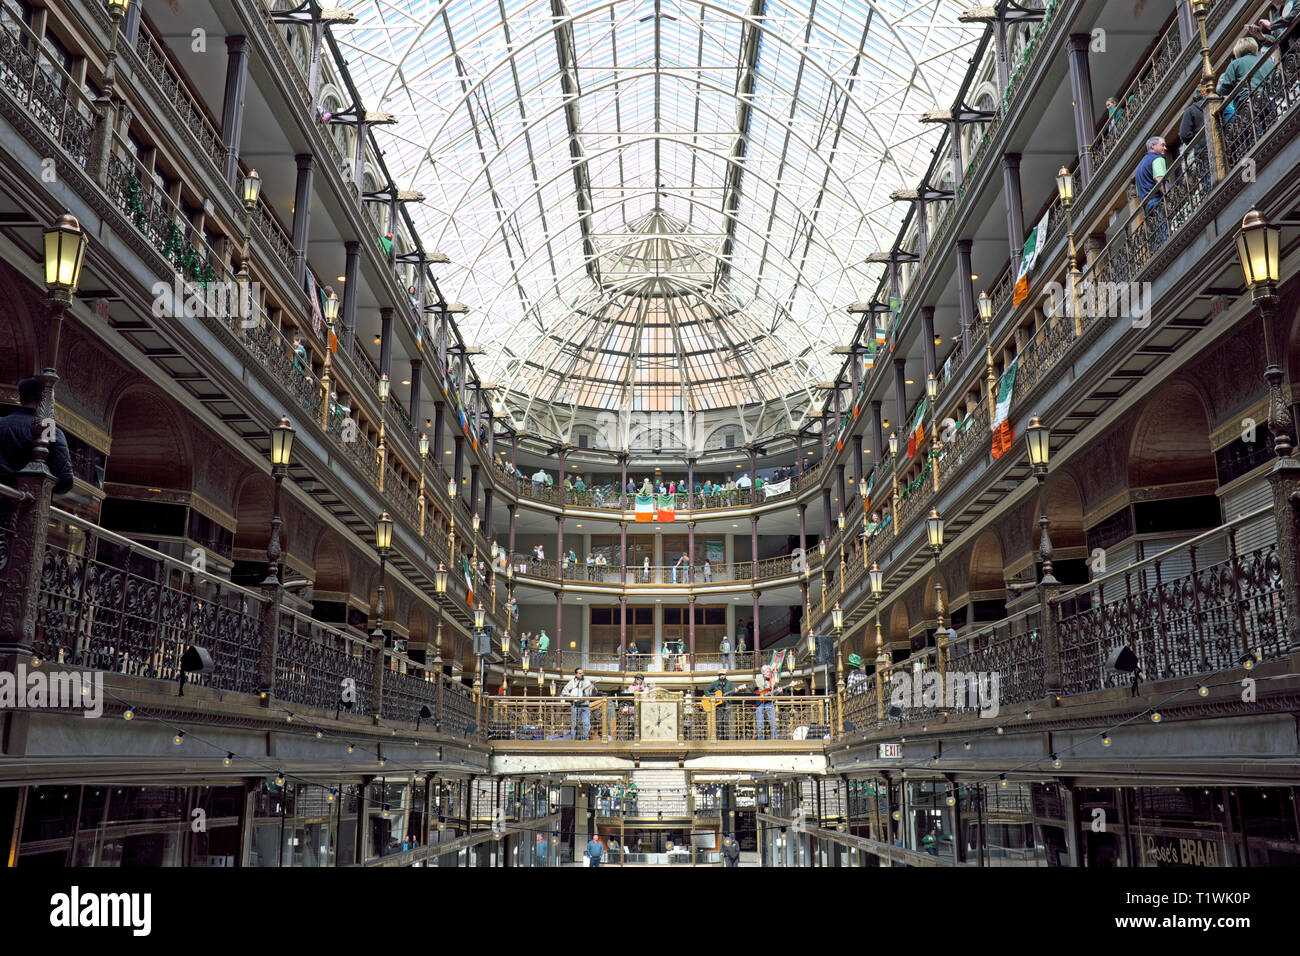 The historic Victorian-Era style Cleveland Old Arcade with its unique glass and iron skylight and 5-story atrium opened in 1890 in Cleveland, Ohio, US Stock Photo